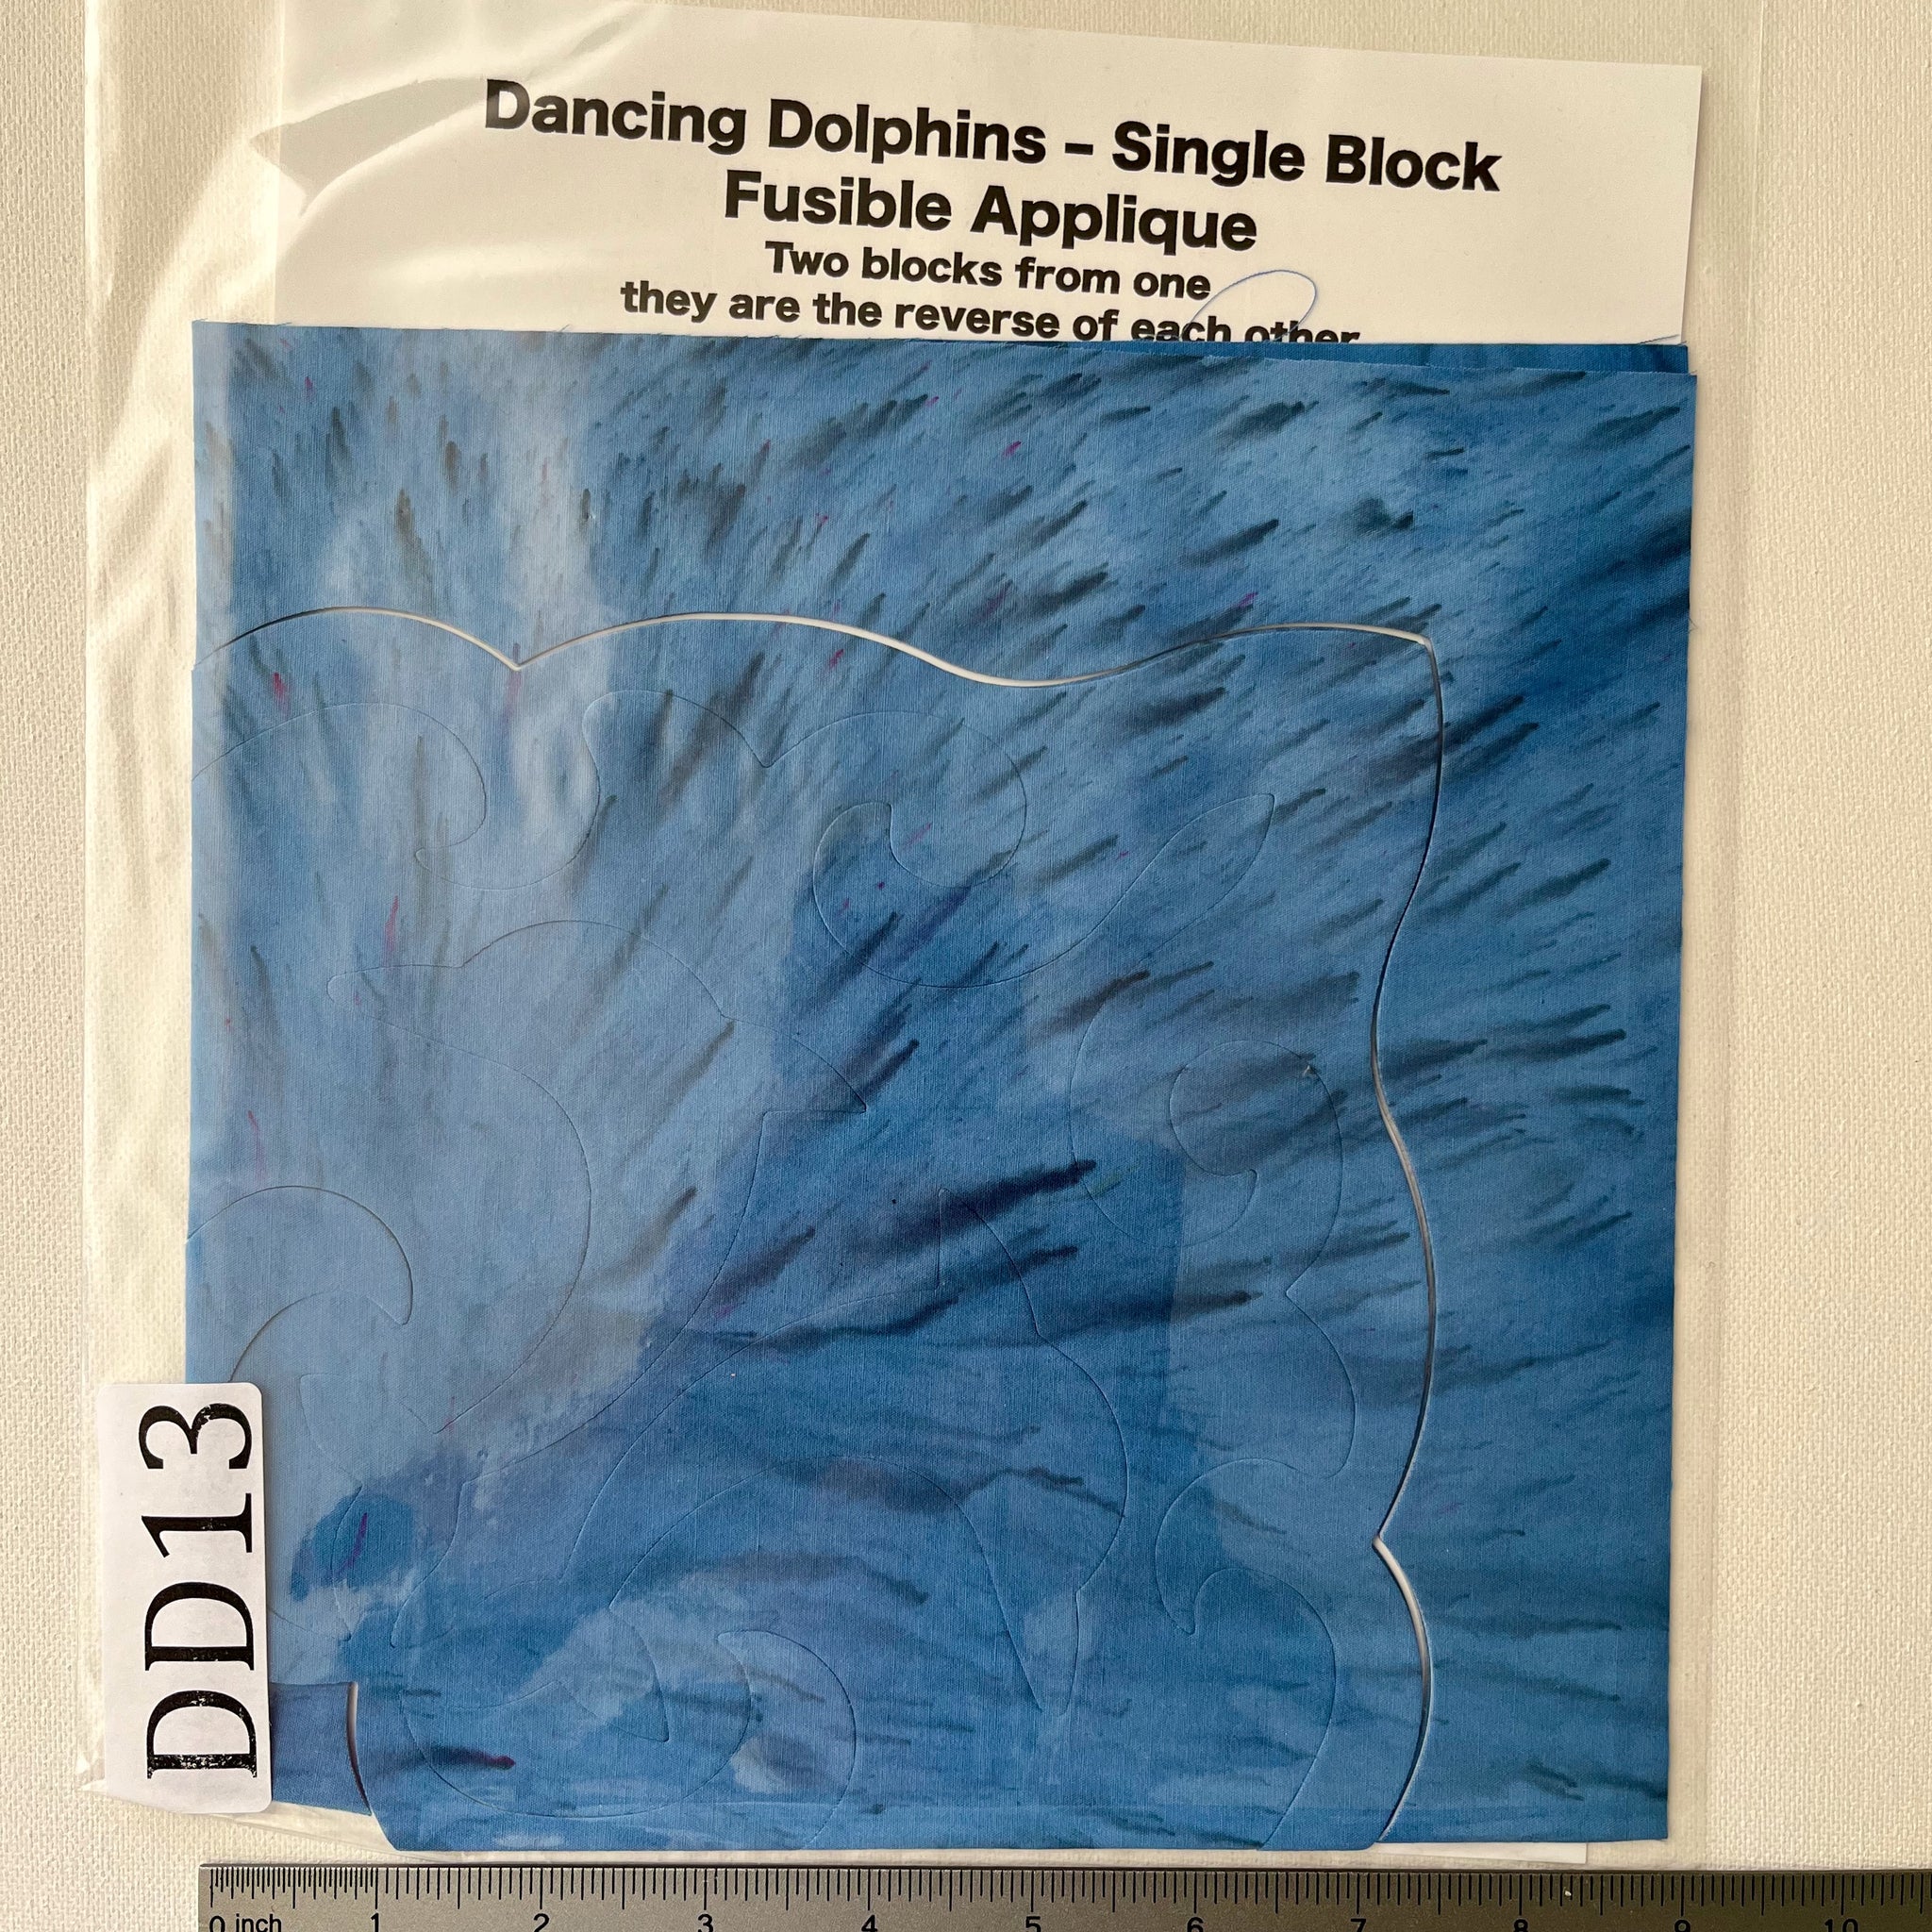 Dancing Dolphins Fusible Applique block made from Gabriele's hand dyed cotton-DD13